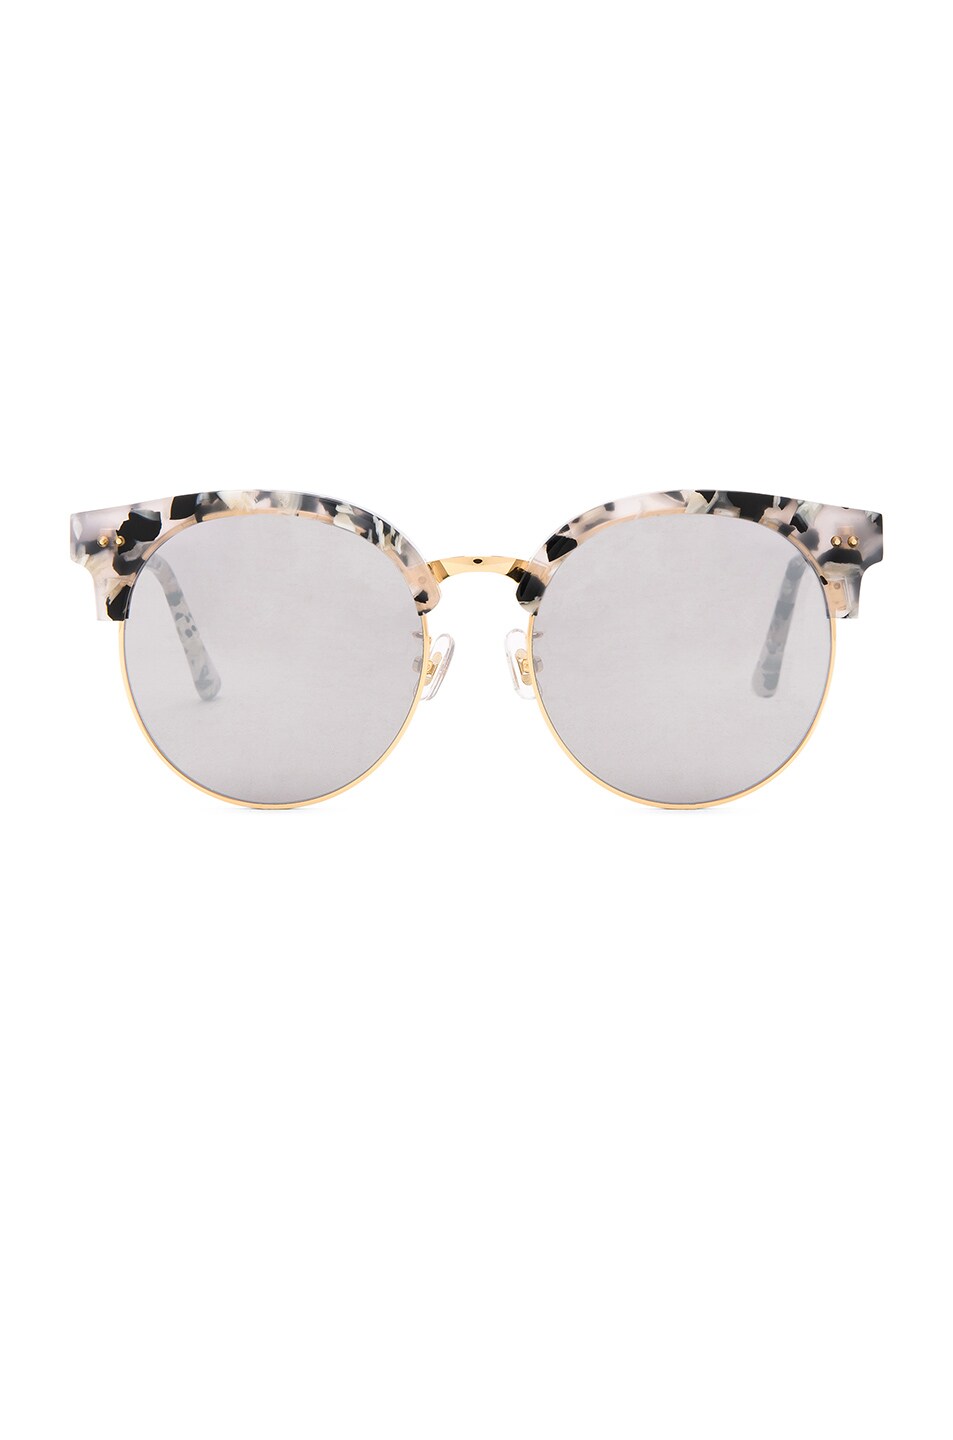 Image 1 of Gentle Monster Moon Cut Sunglasses in White Tortoise Acetate & Silver Mirror